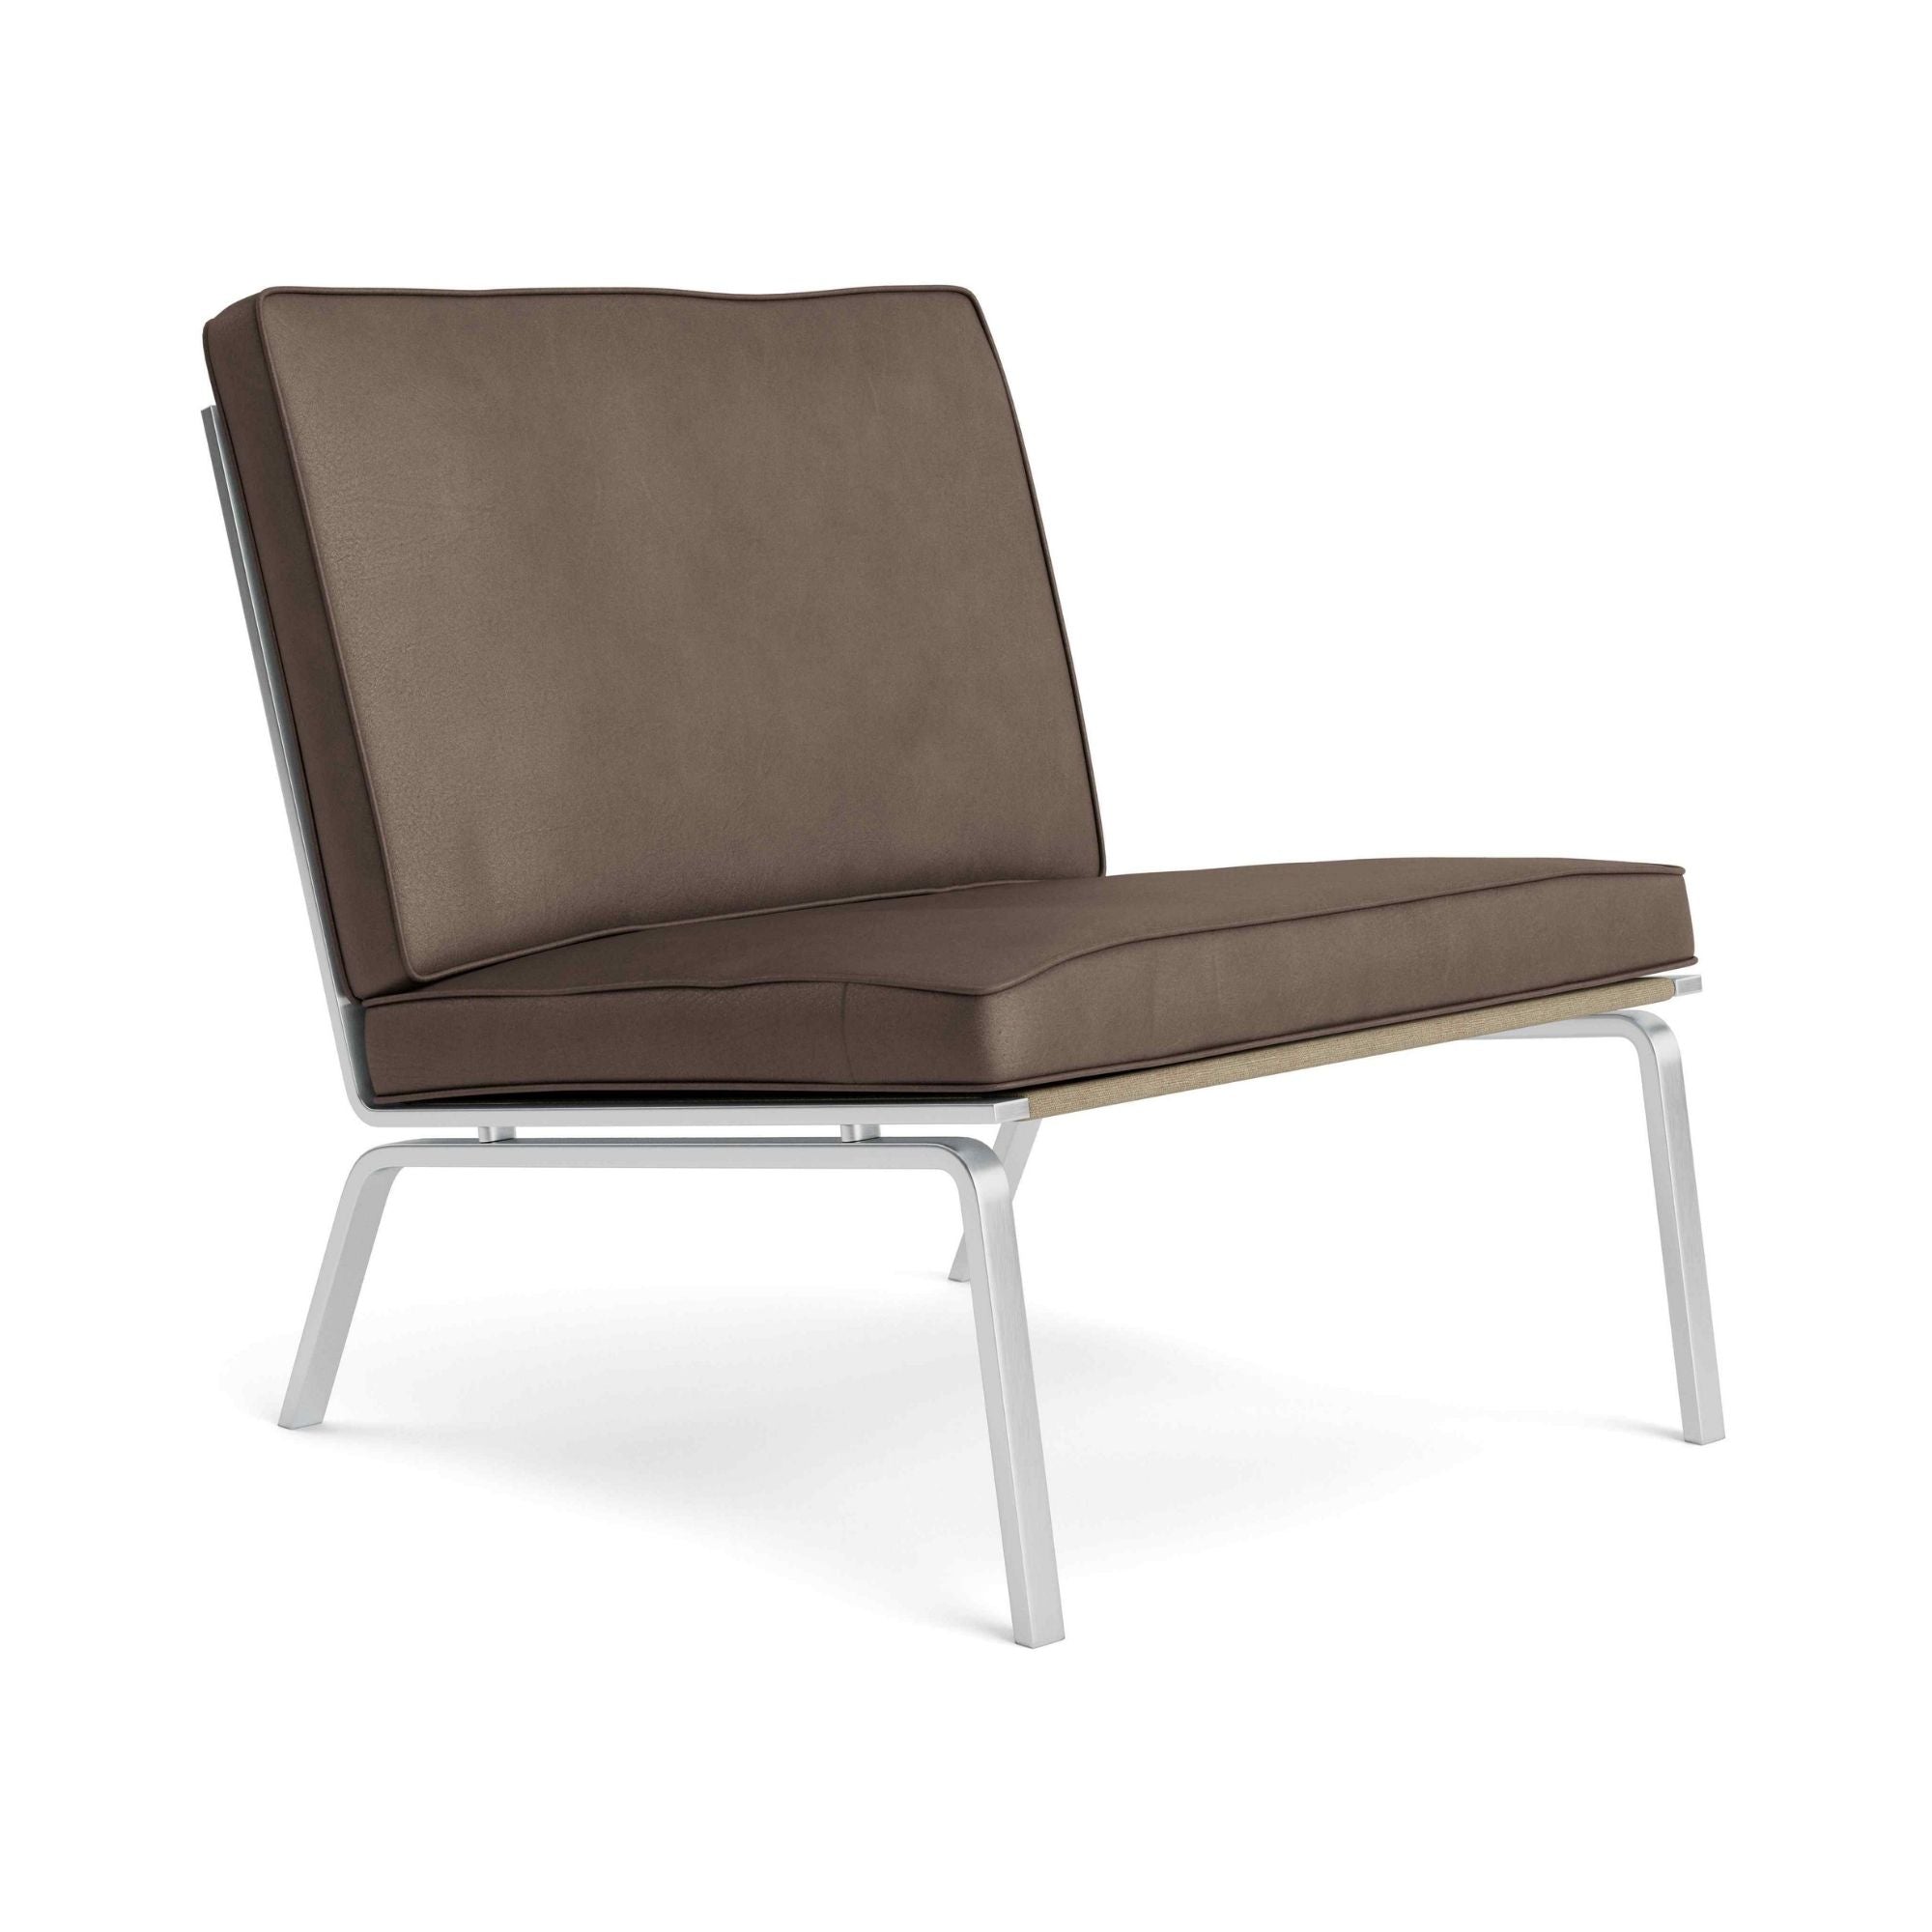 Man Lounge Chair - Leather